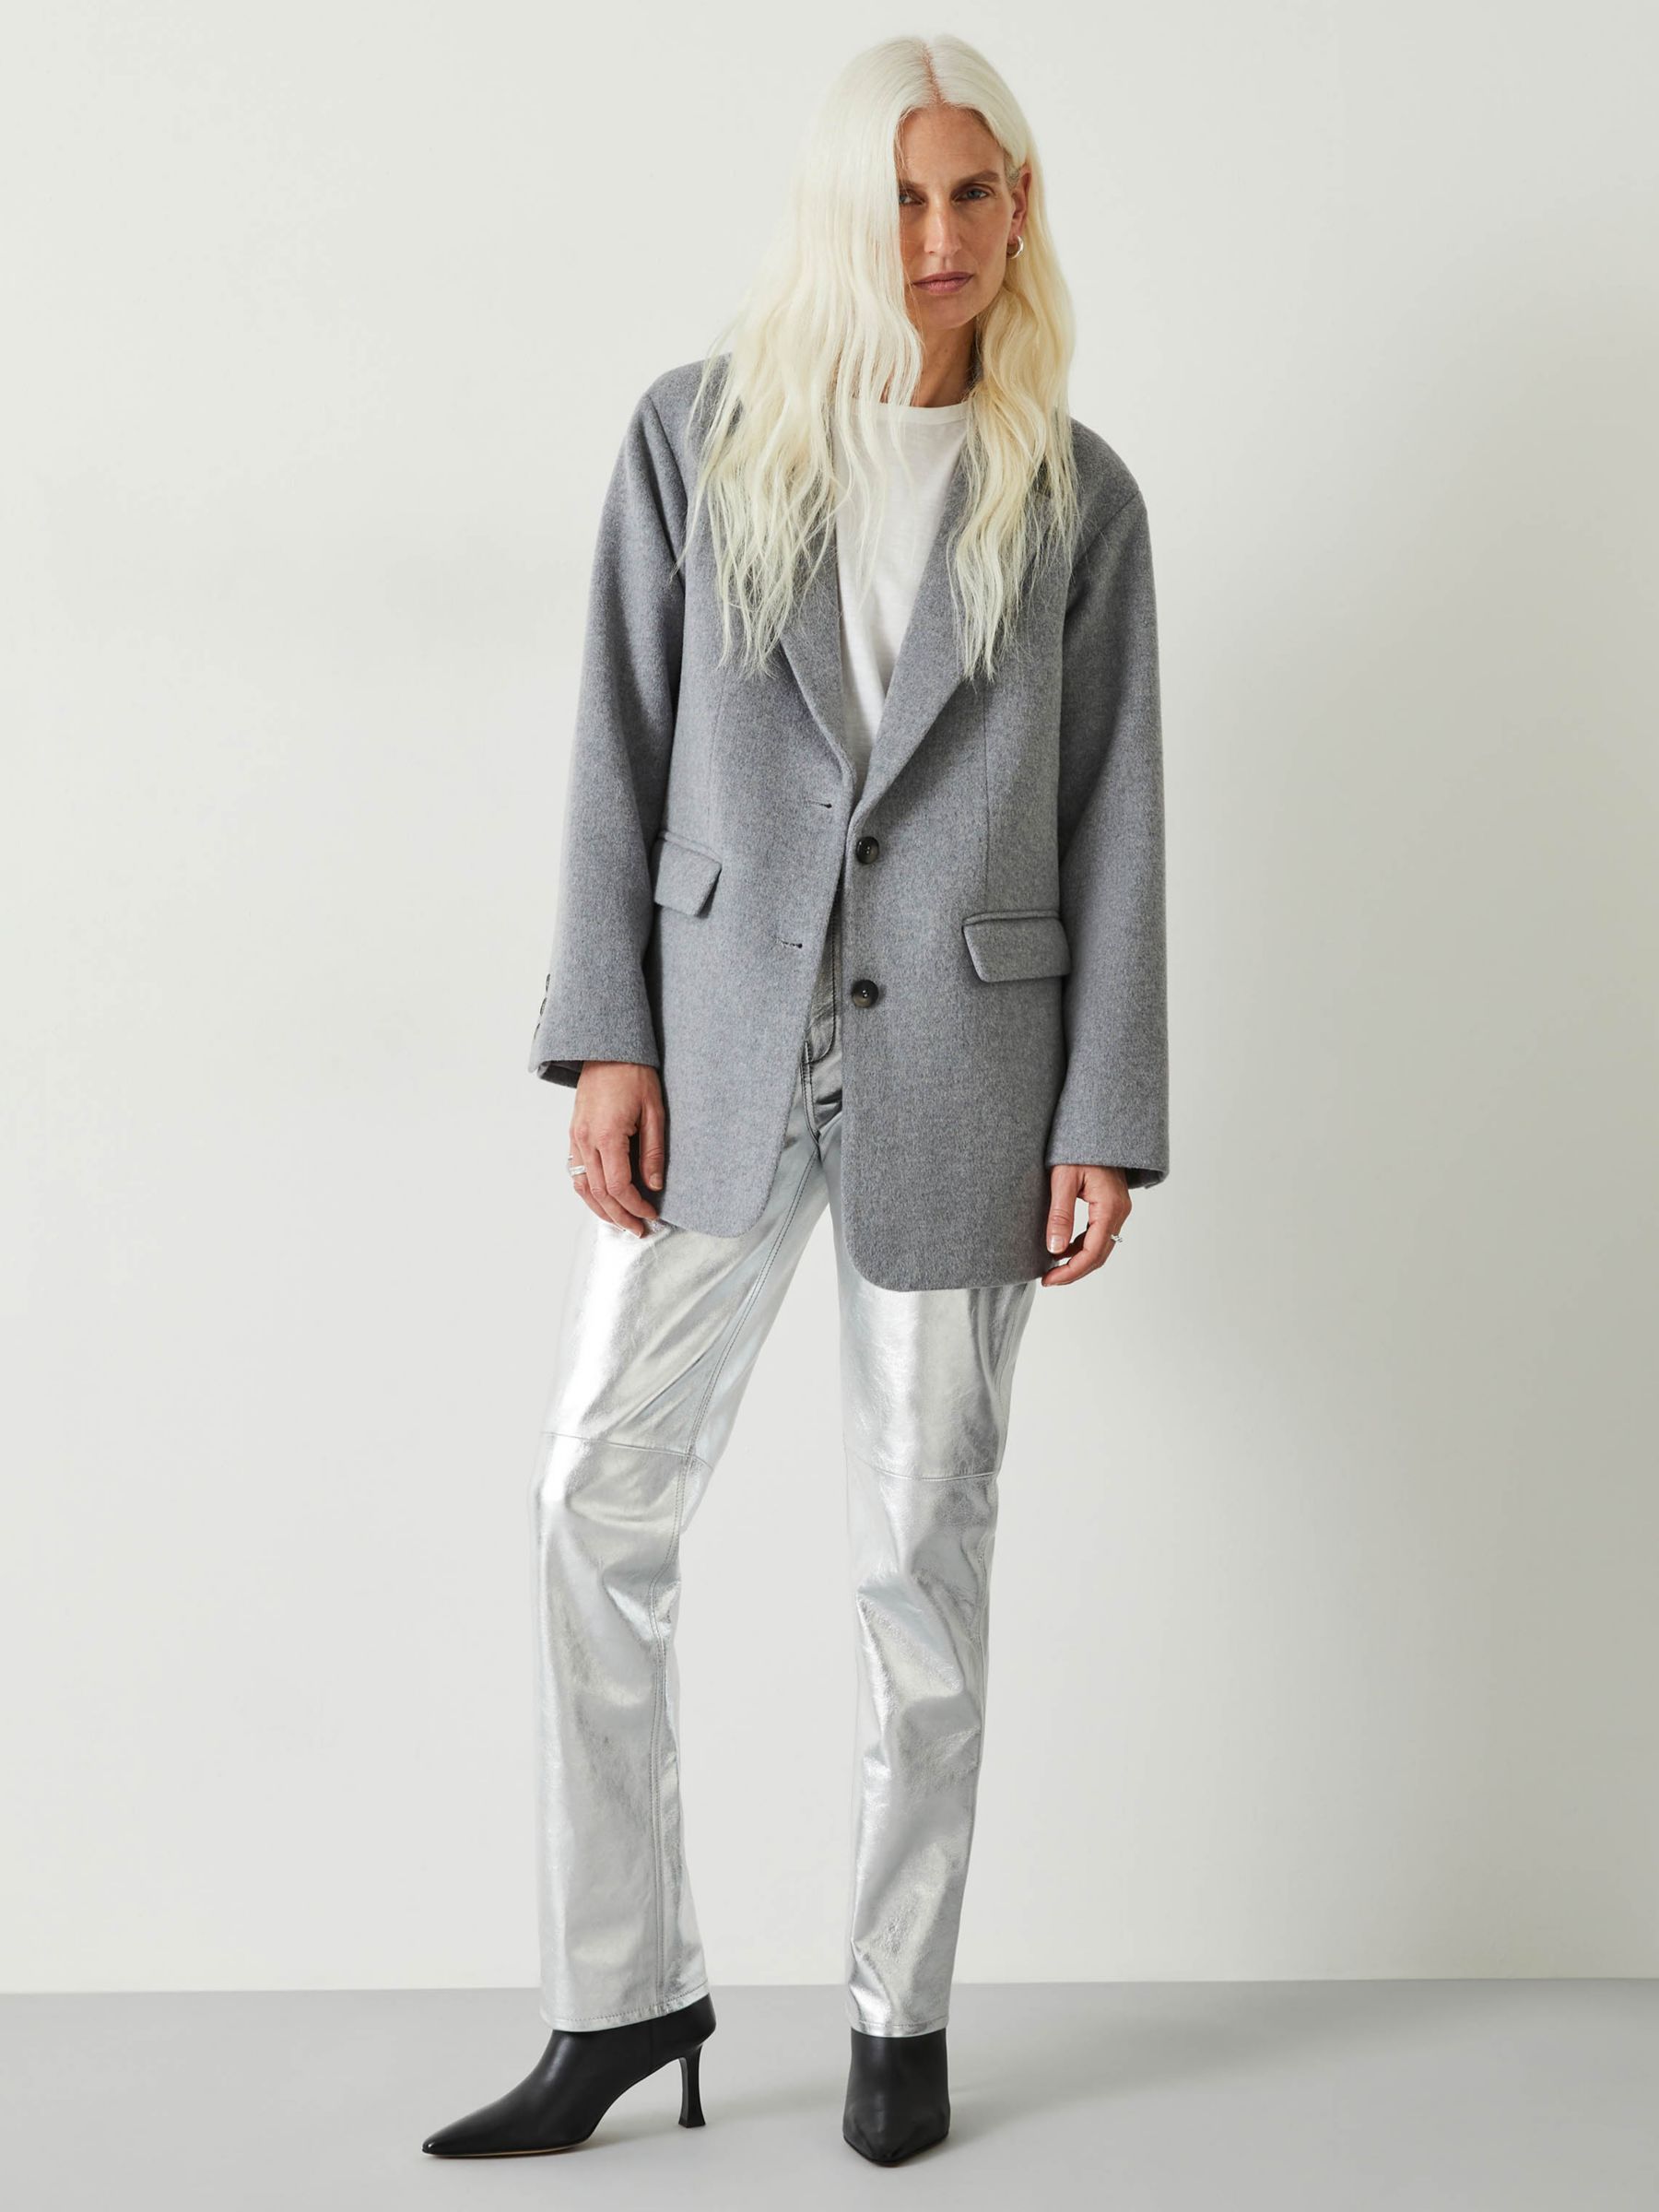 HUSH Silver Leather Trousers, £239.20